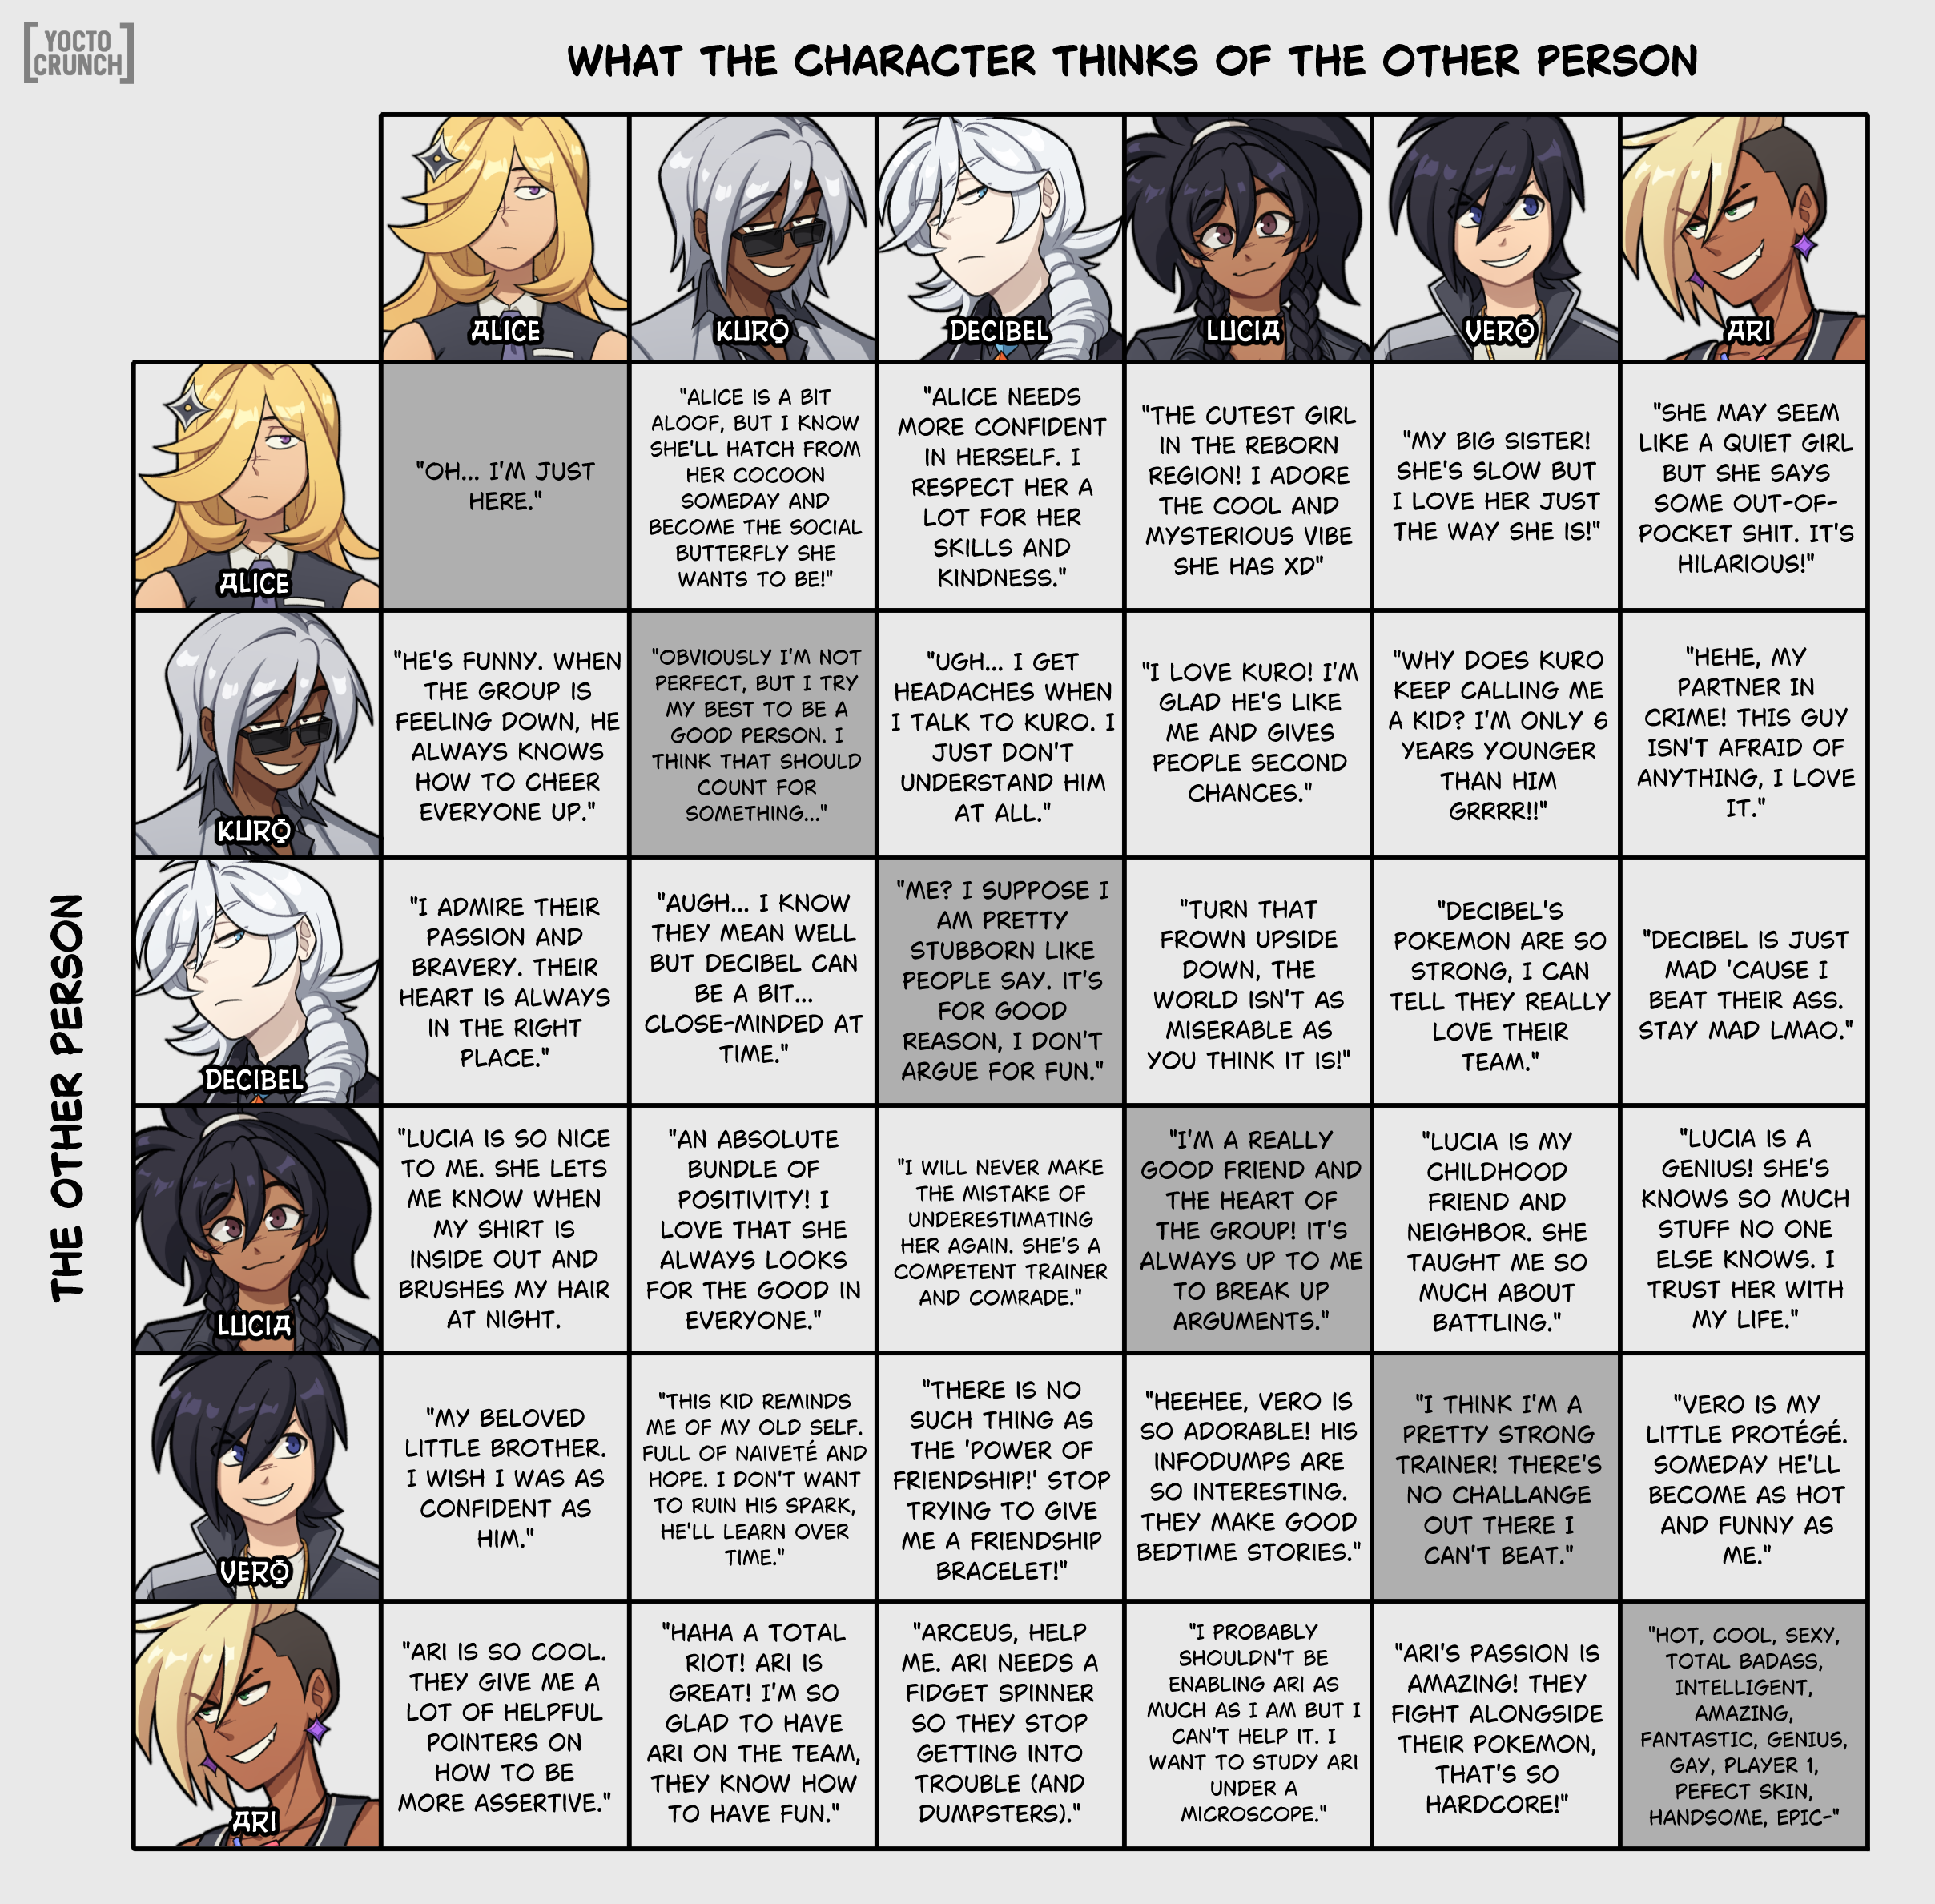 Protag%20Relationships.png